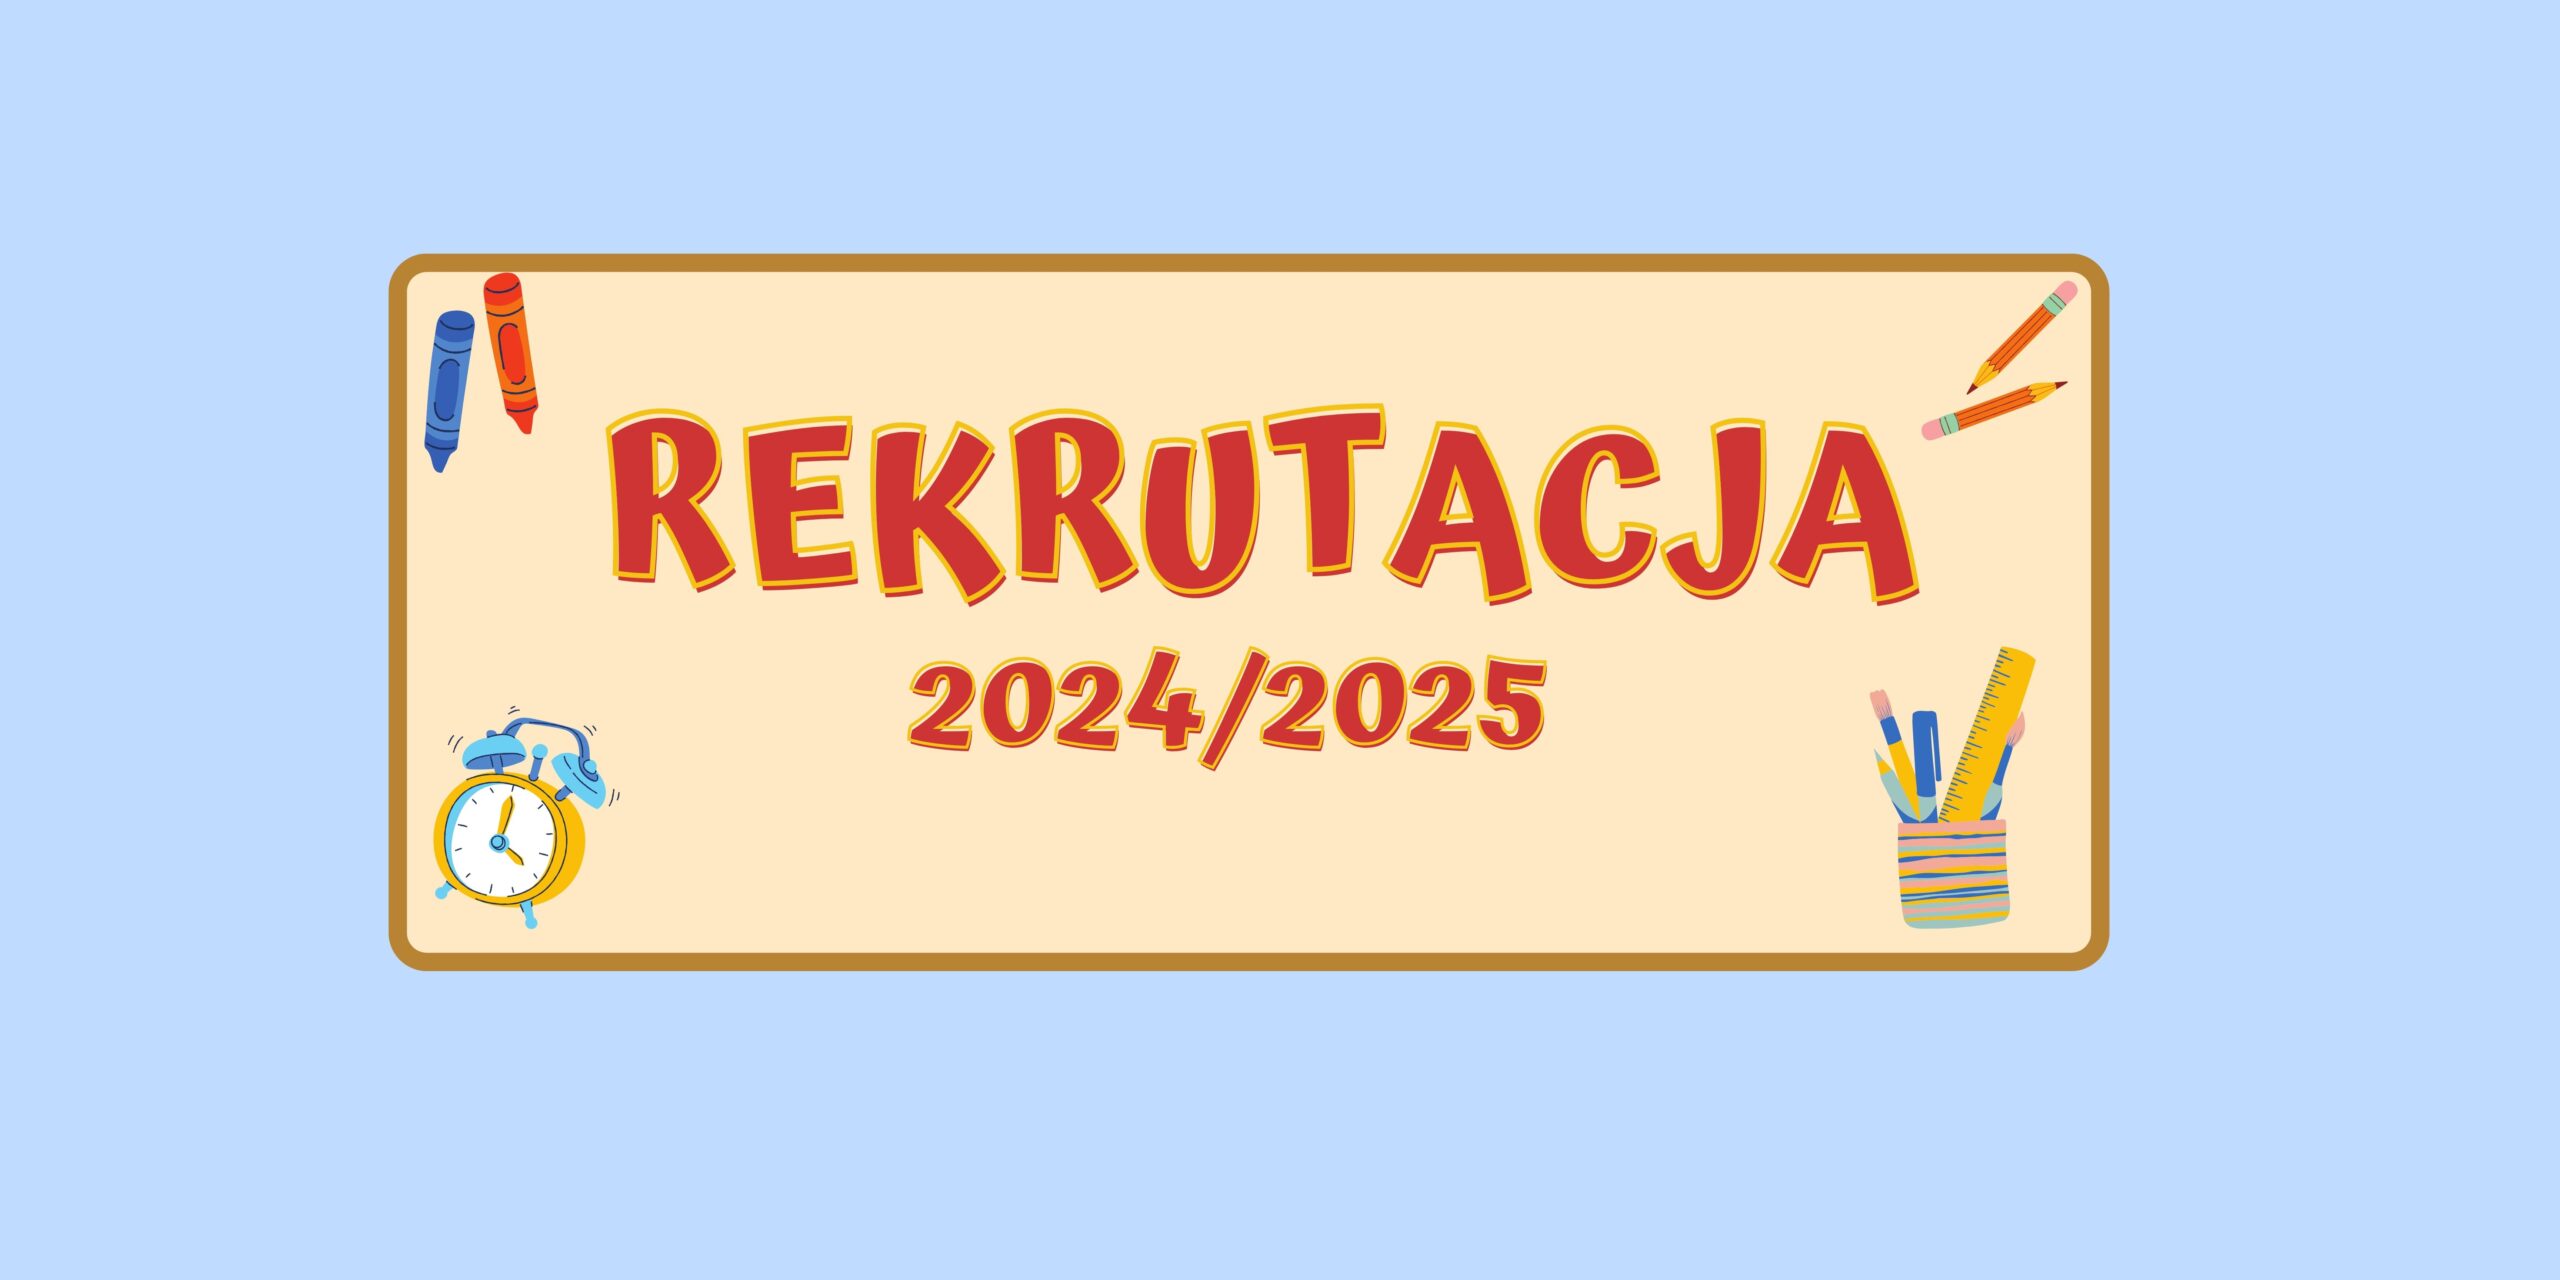 You are currently viewing REKRUTACJA 2024/2025